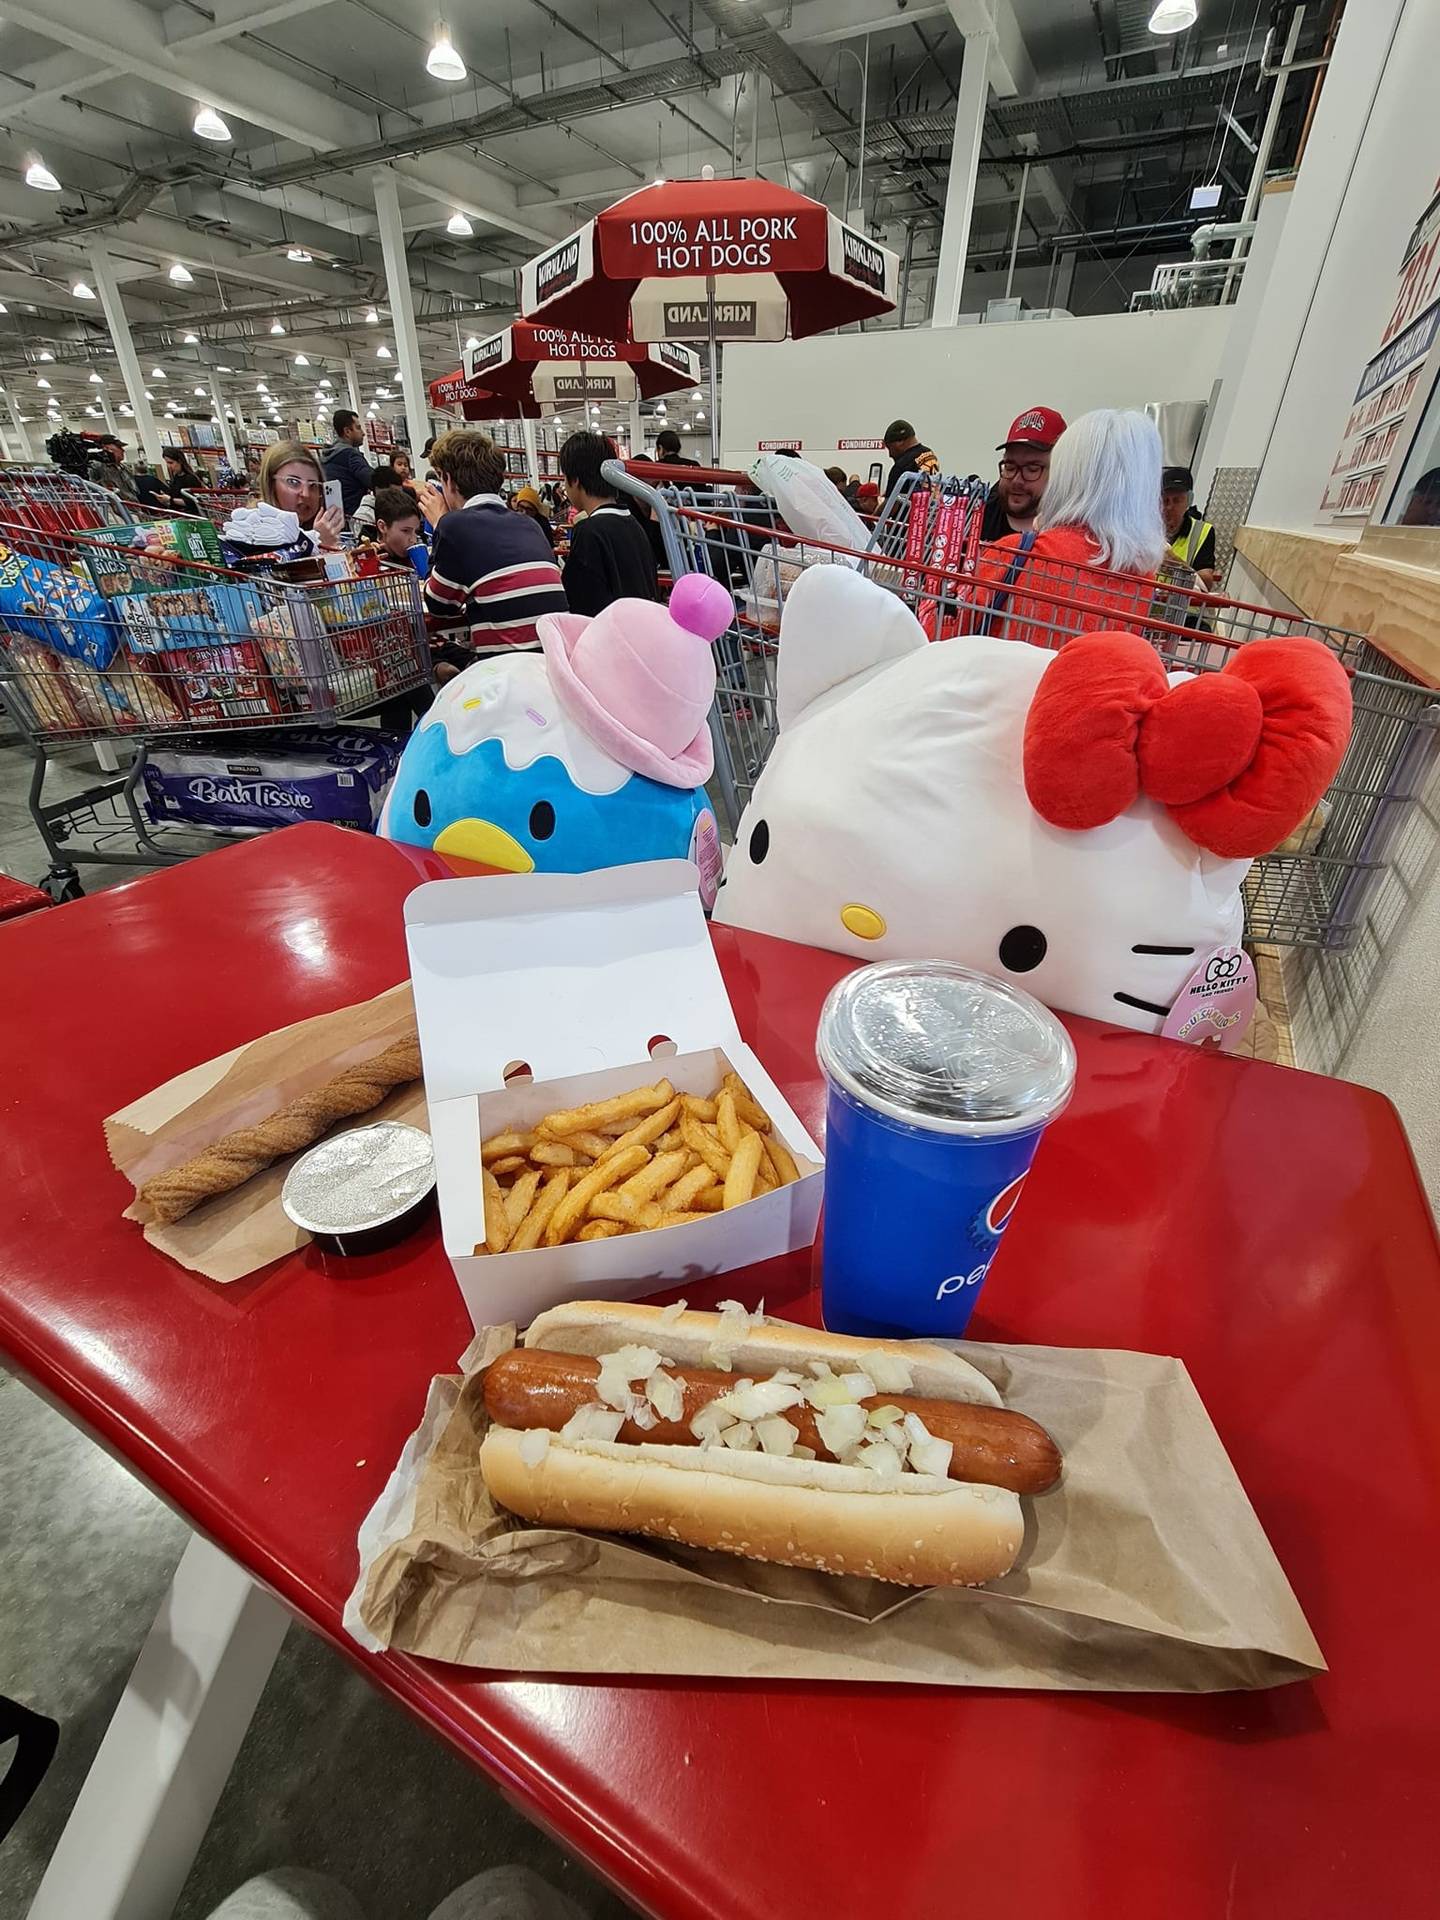 Arielle Rae Aguilar went to Costco just to get Hello Kitty toys and food from the foodcourt. Photo / Costco NZ Fans FB page